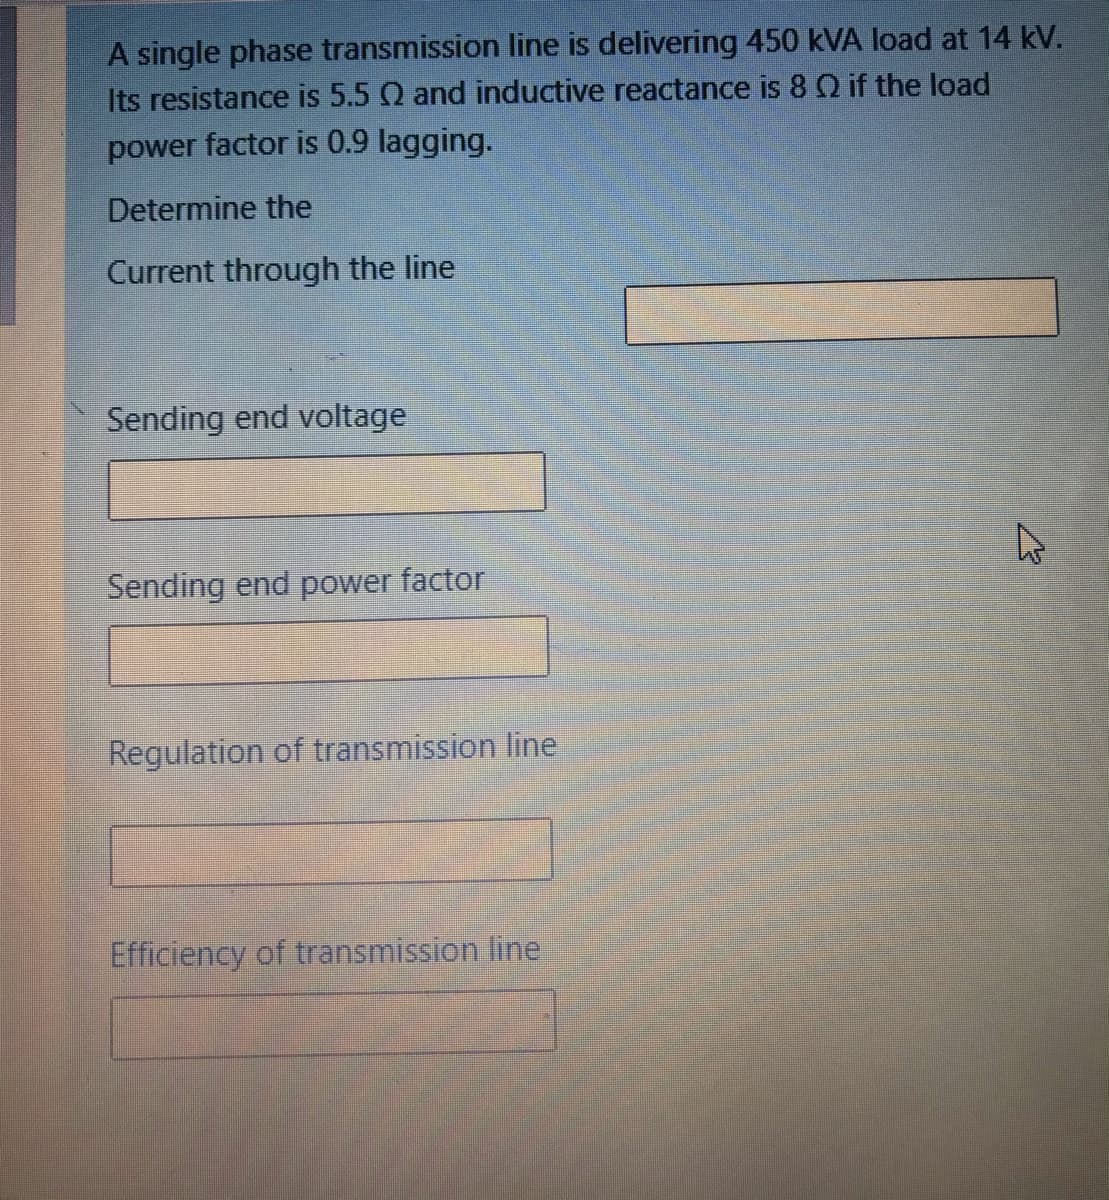 A single phase transmission line is delivering 450 kVA load at 14 kV.
Its resistance is 5.5 Q and inductive reactance is 8 Q if the load
power factor is 0.9 lagging.
Determine the
Current through the line
Sending end voltage
Sending end power factor
Regulation of transmission line
Efficiency of transmission line
